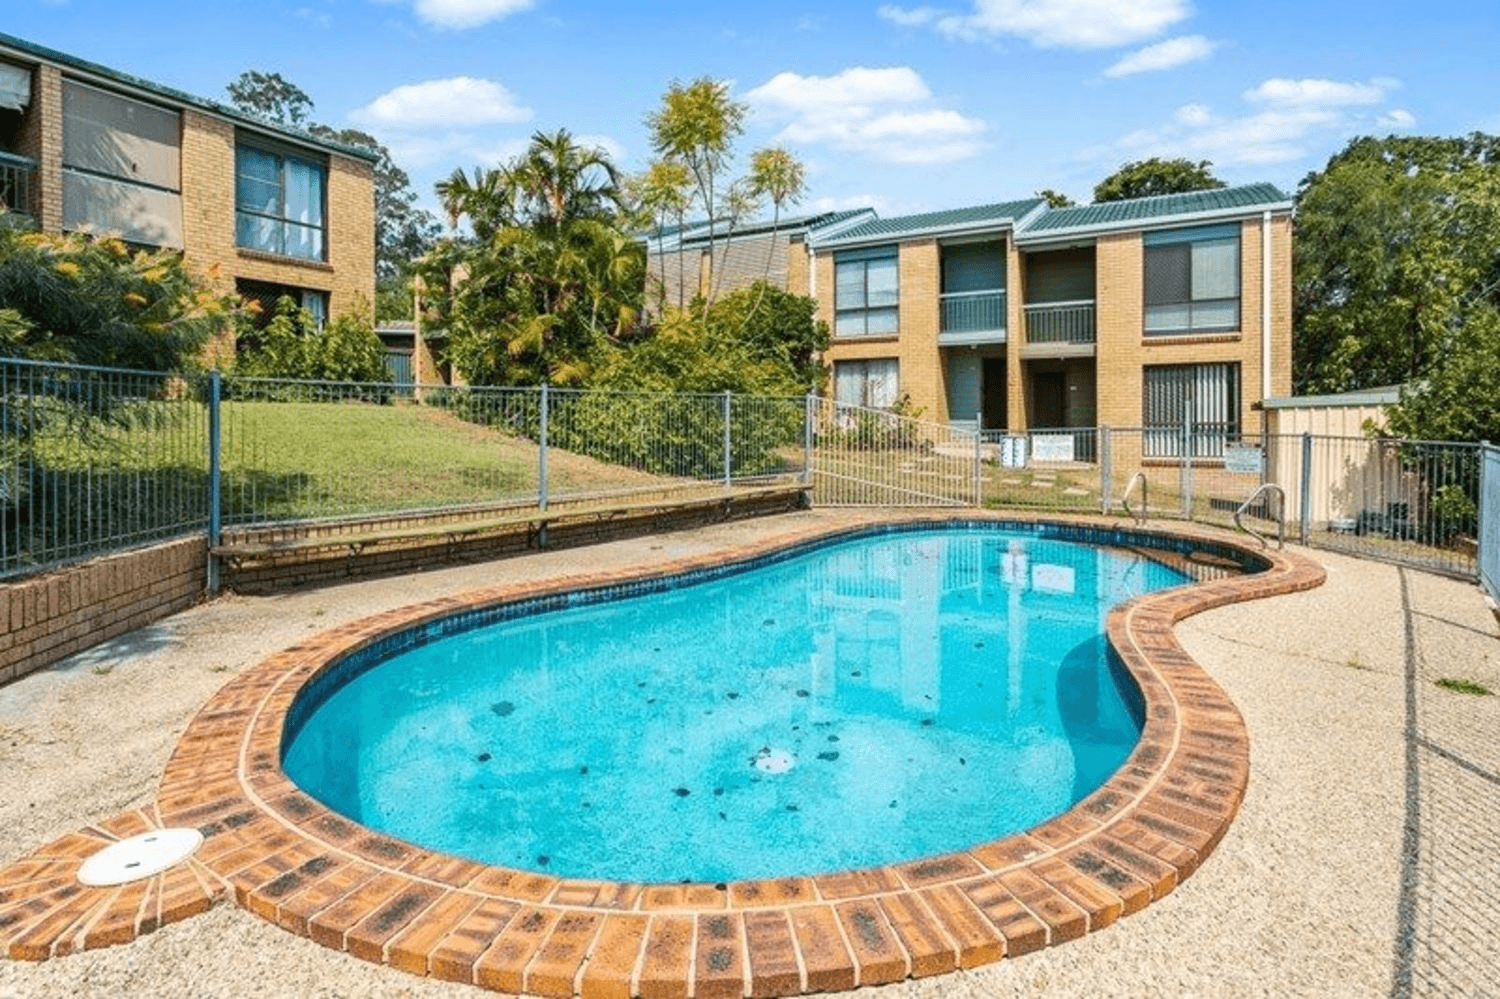 13B/3 Guinevere Court, Bethania, QLD 4205